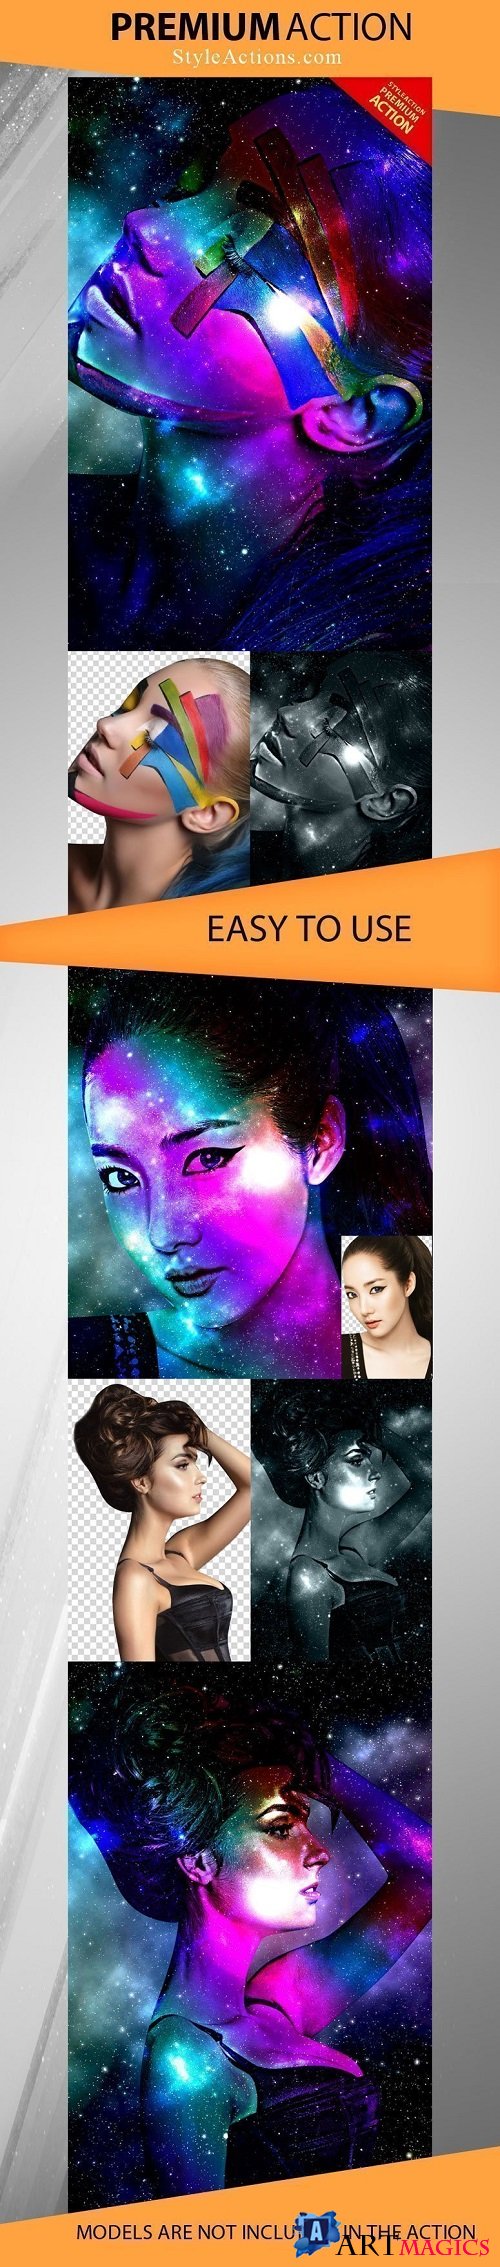 StyleActions - Colorful Starry Sky Photoshop Action